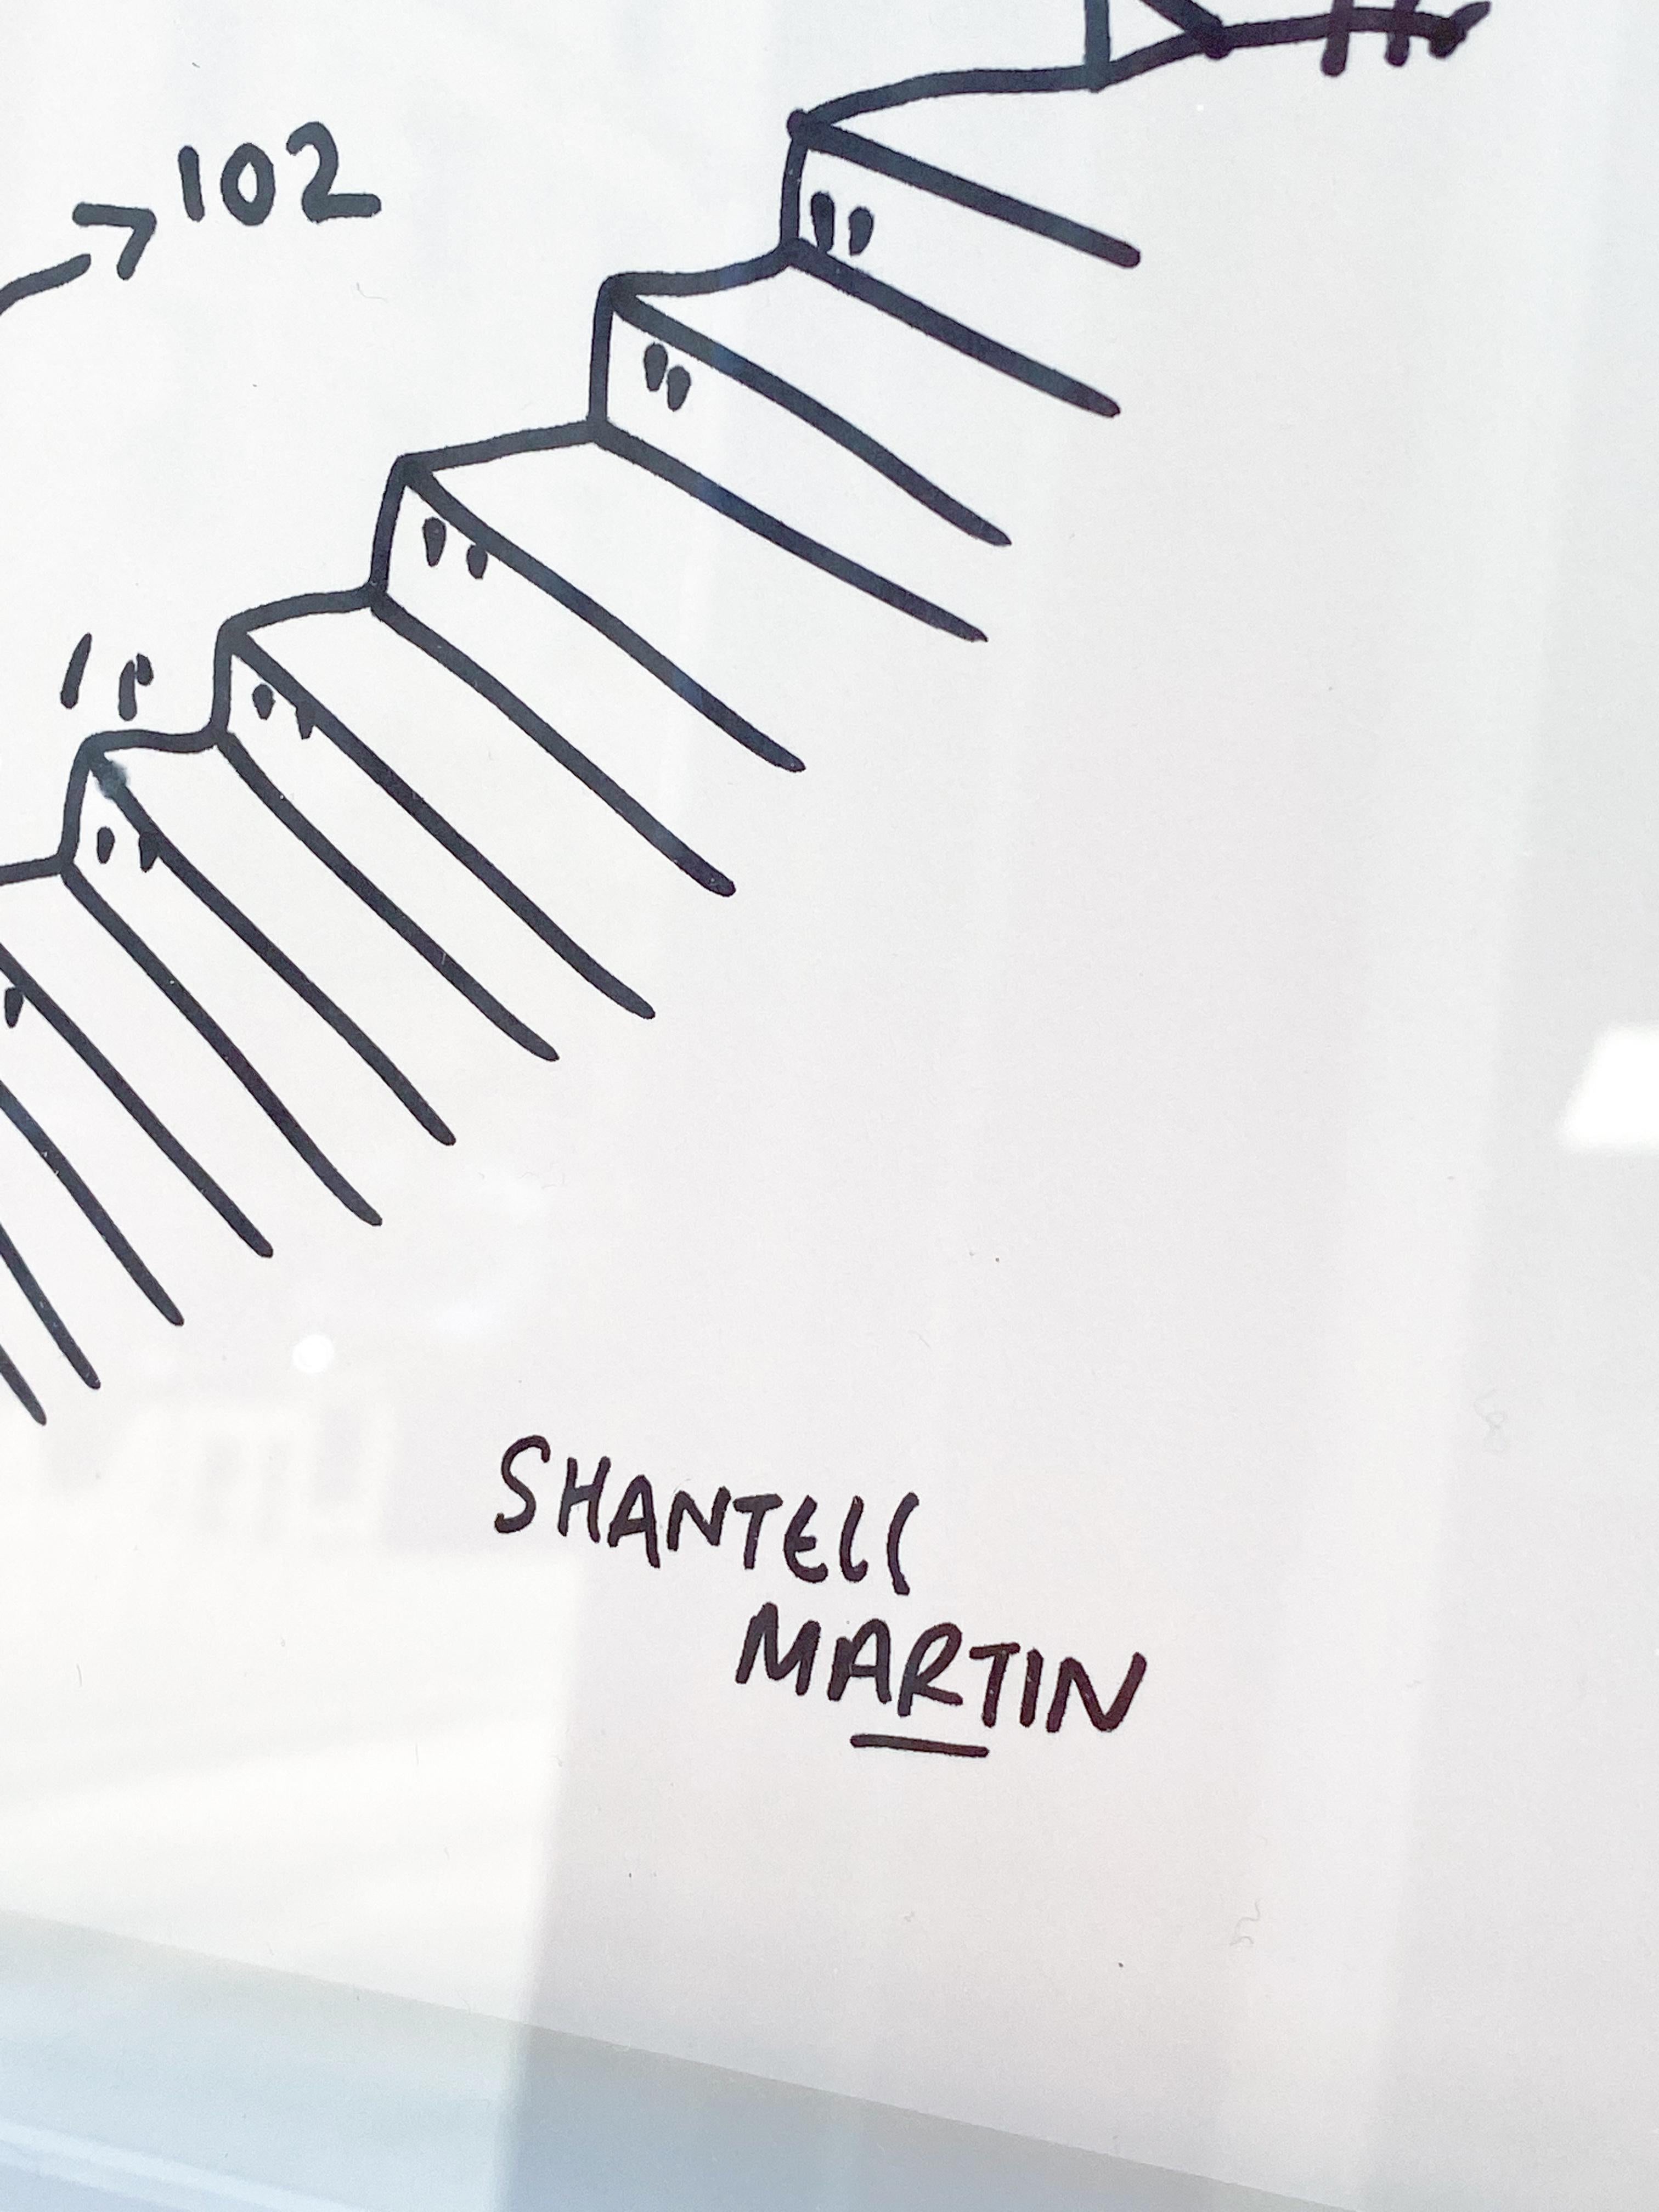 shantell name meaning